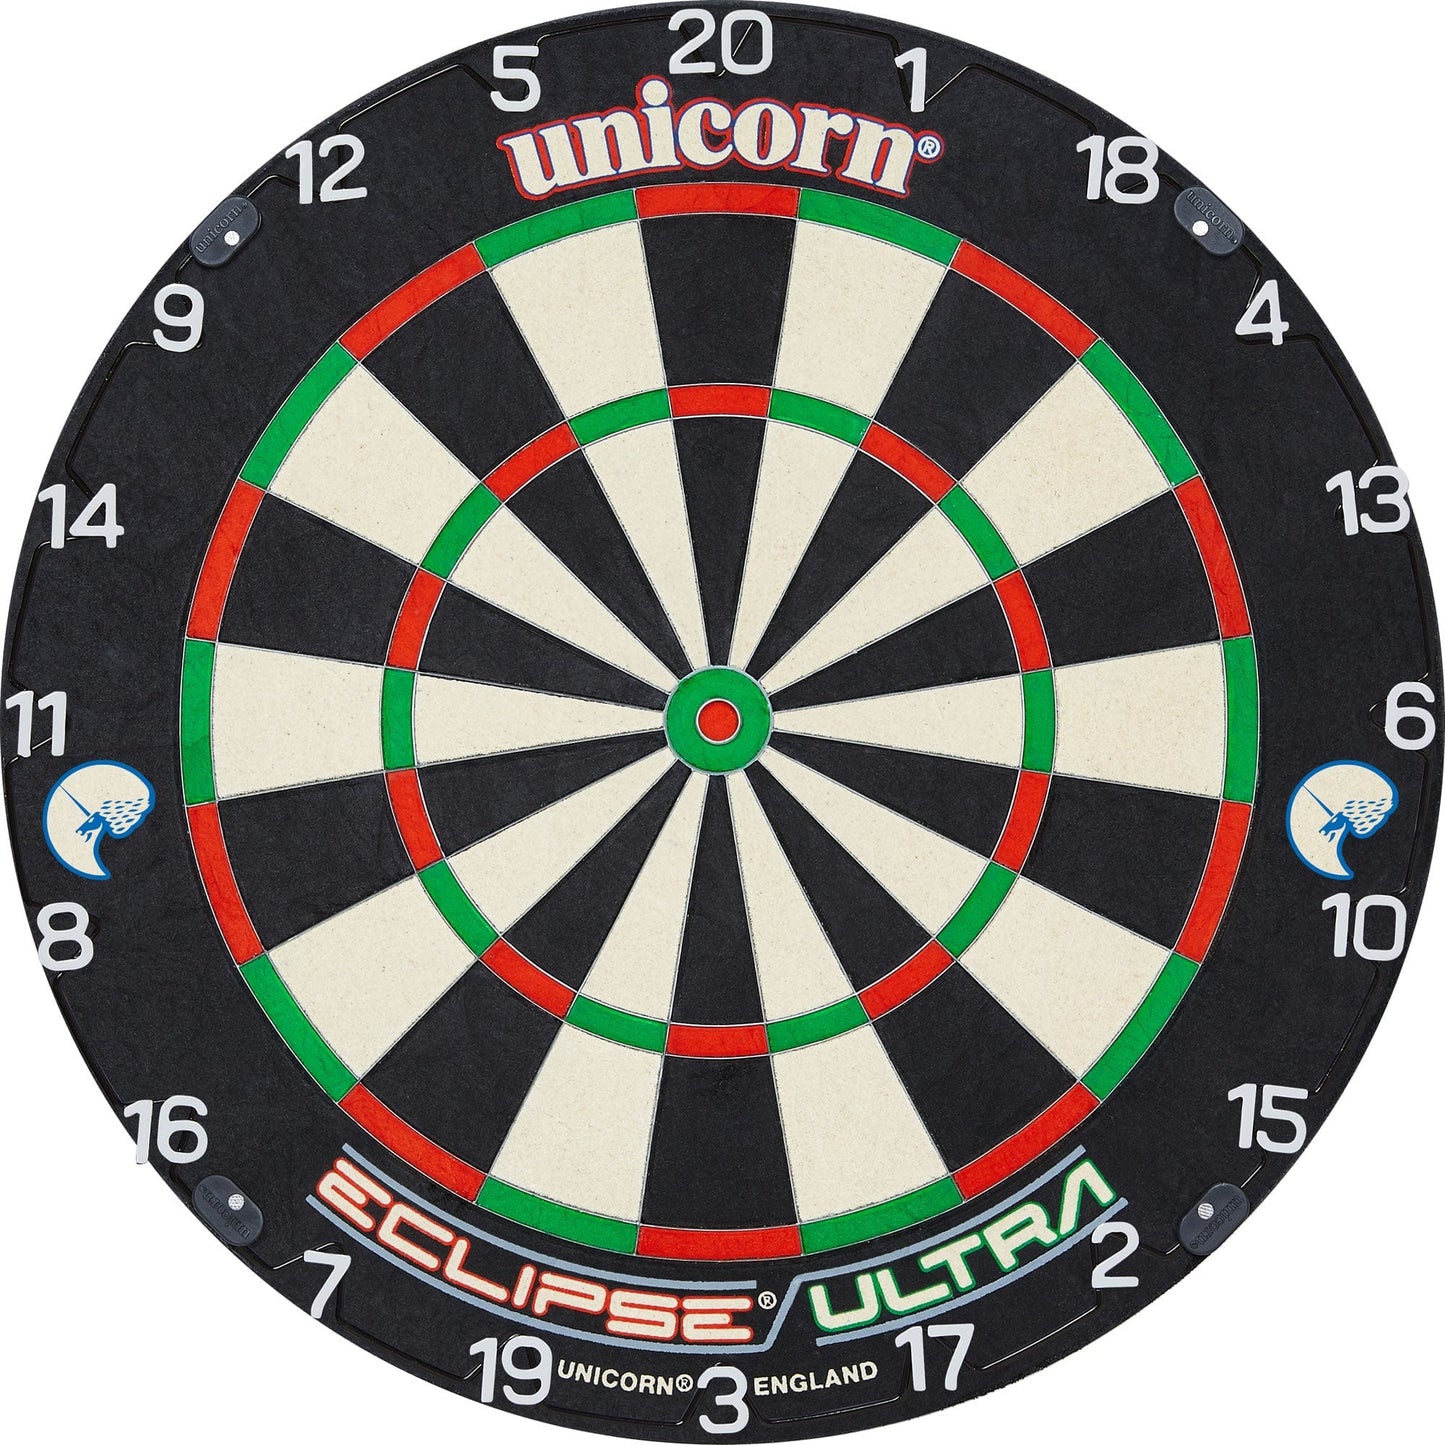 Unicorn Number Ring - for Eclipse Ultra Dartboard - Level Numbers